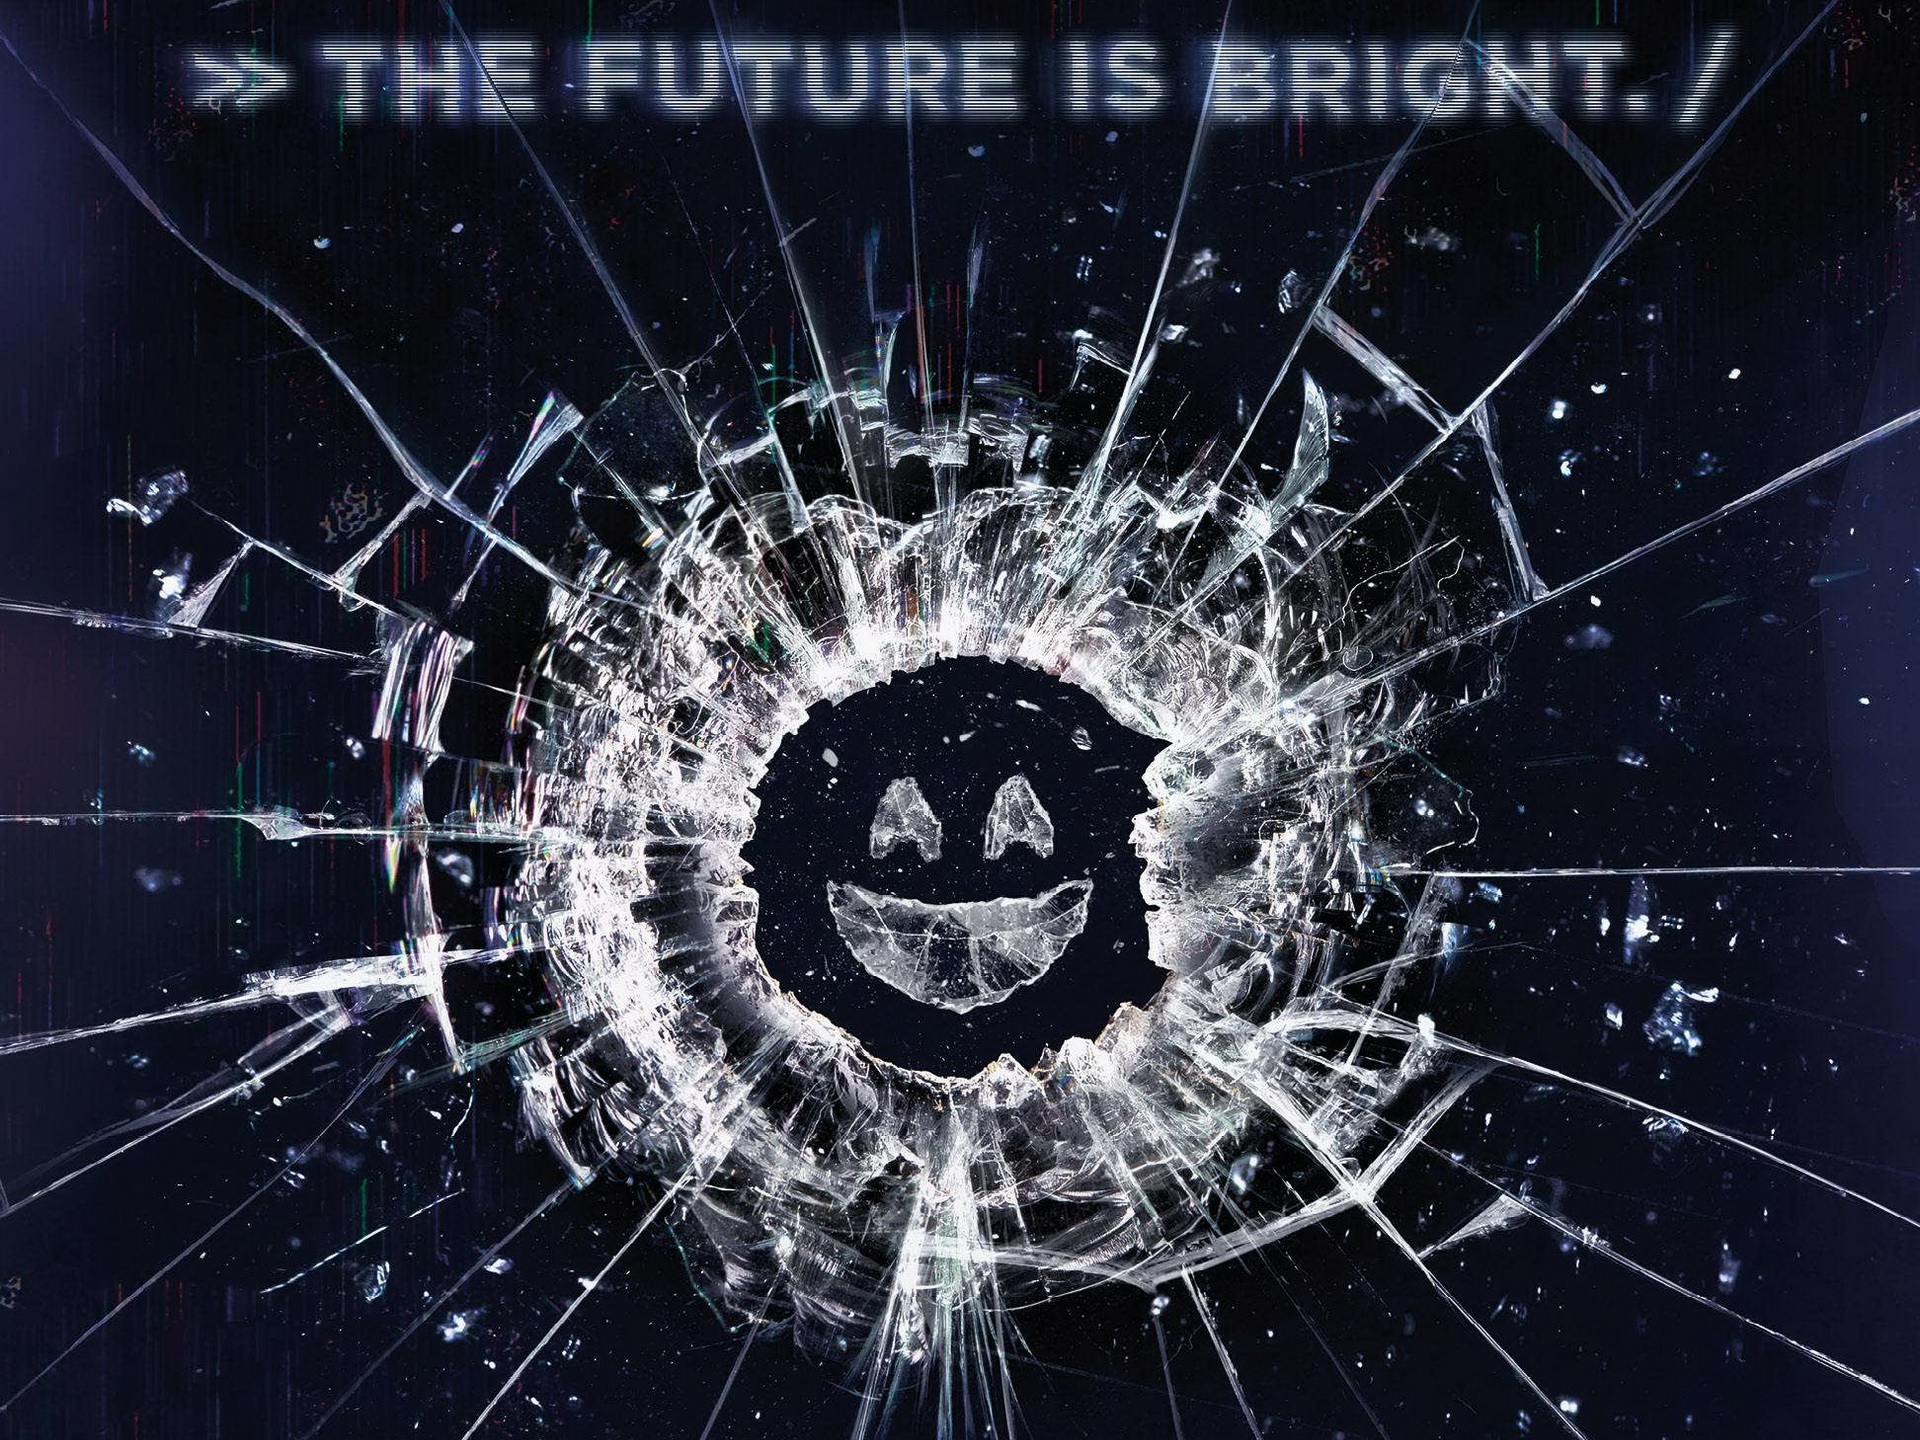 Black Mirror Wallpaper And Background Image